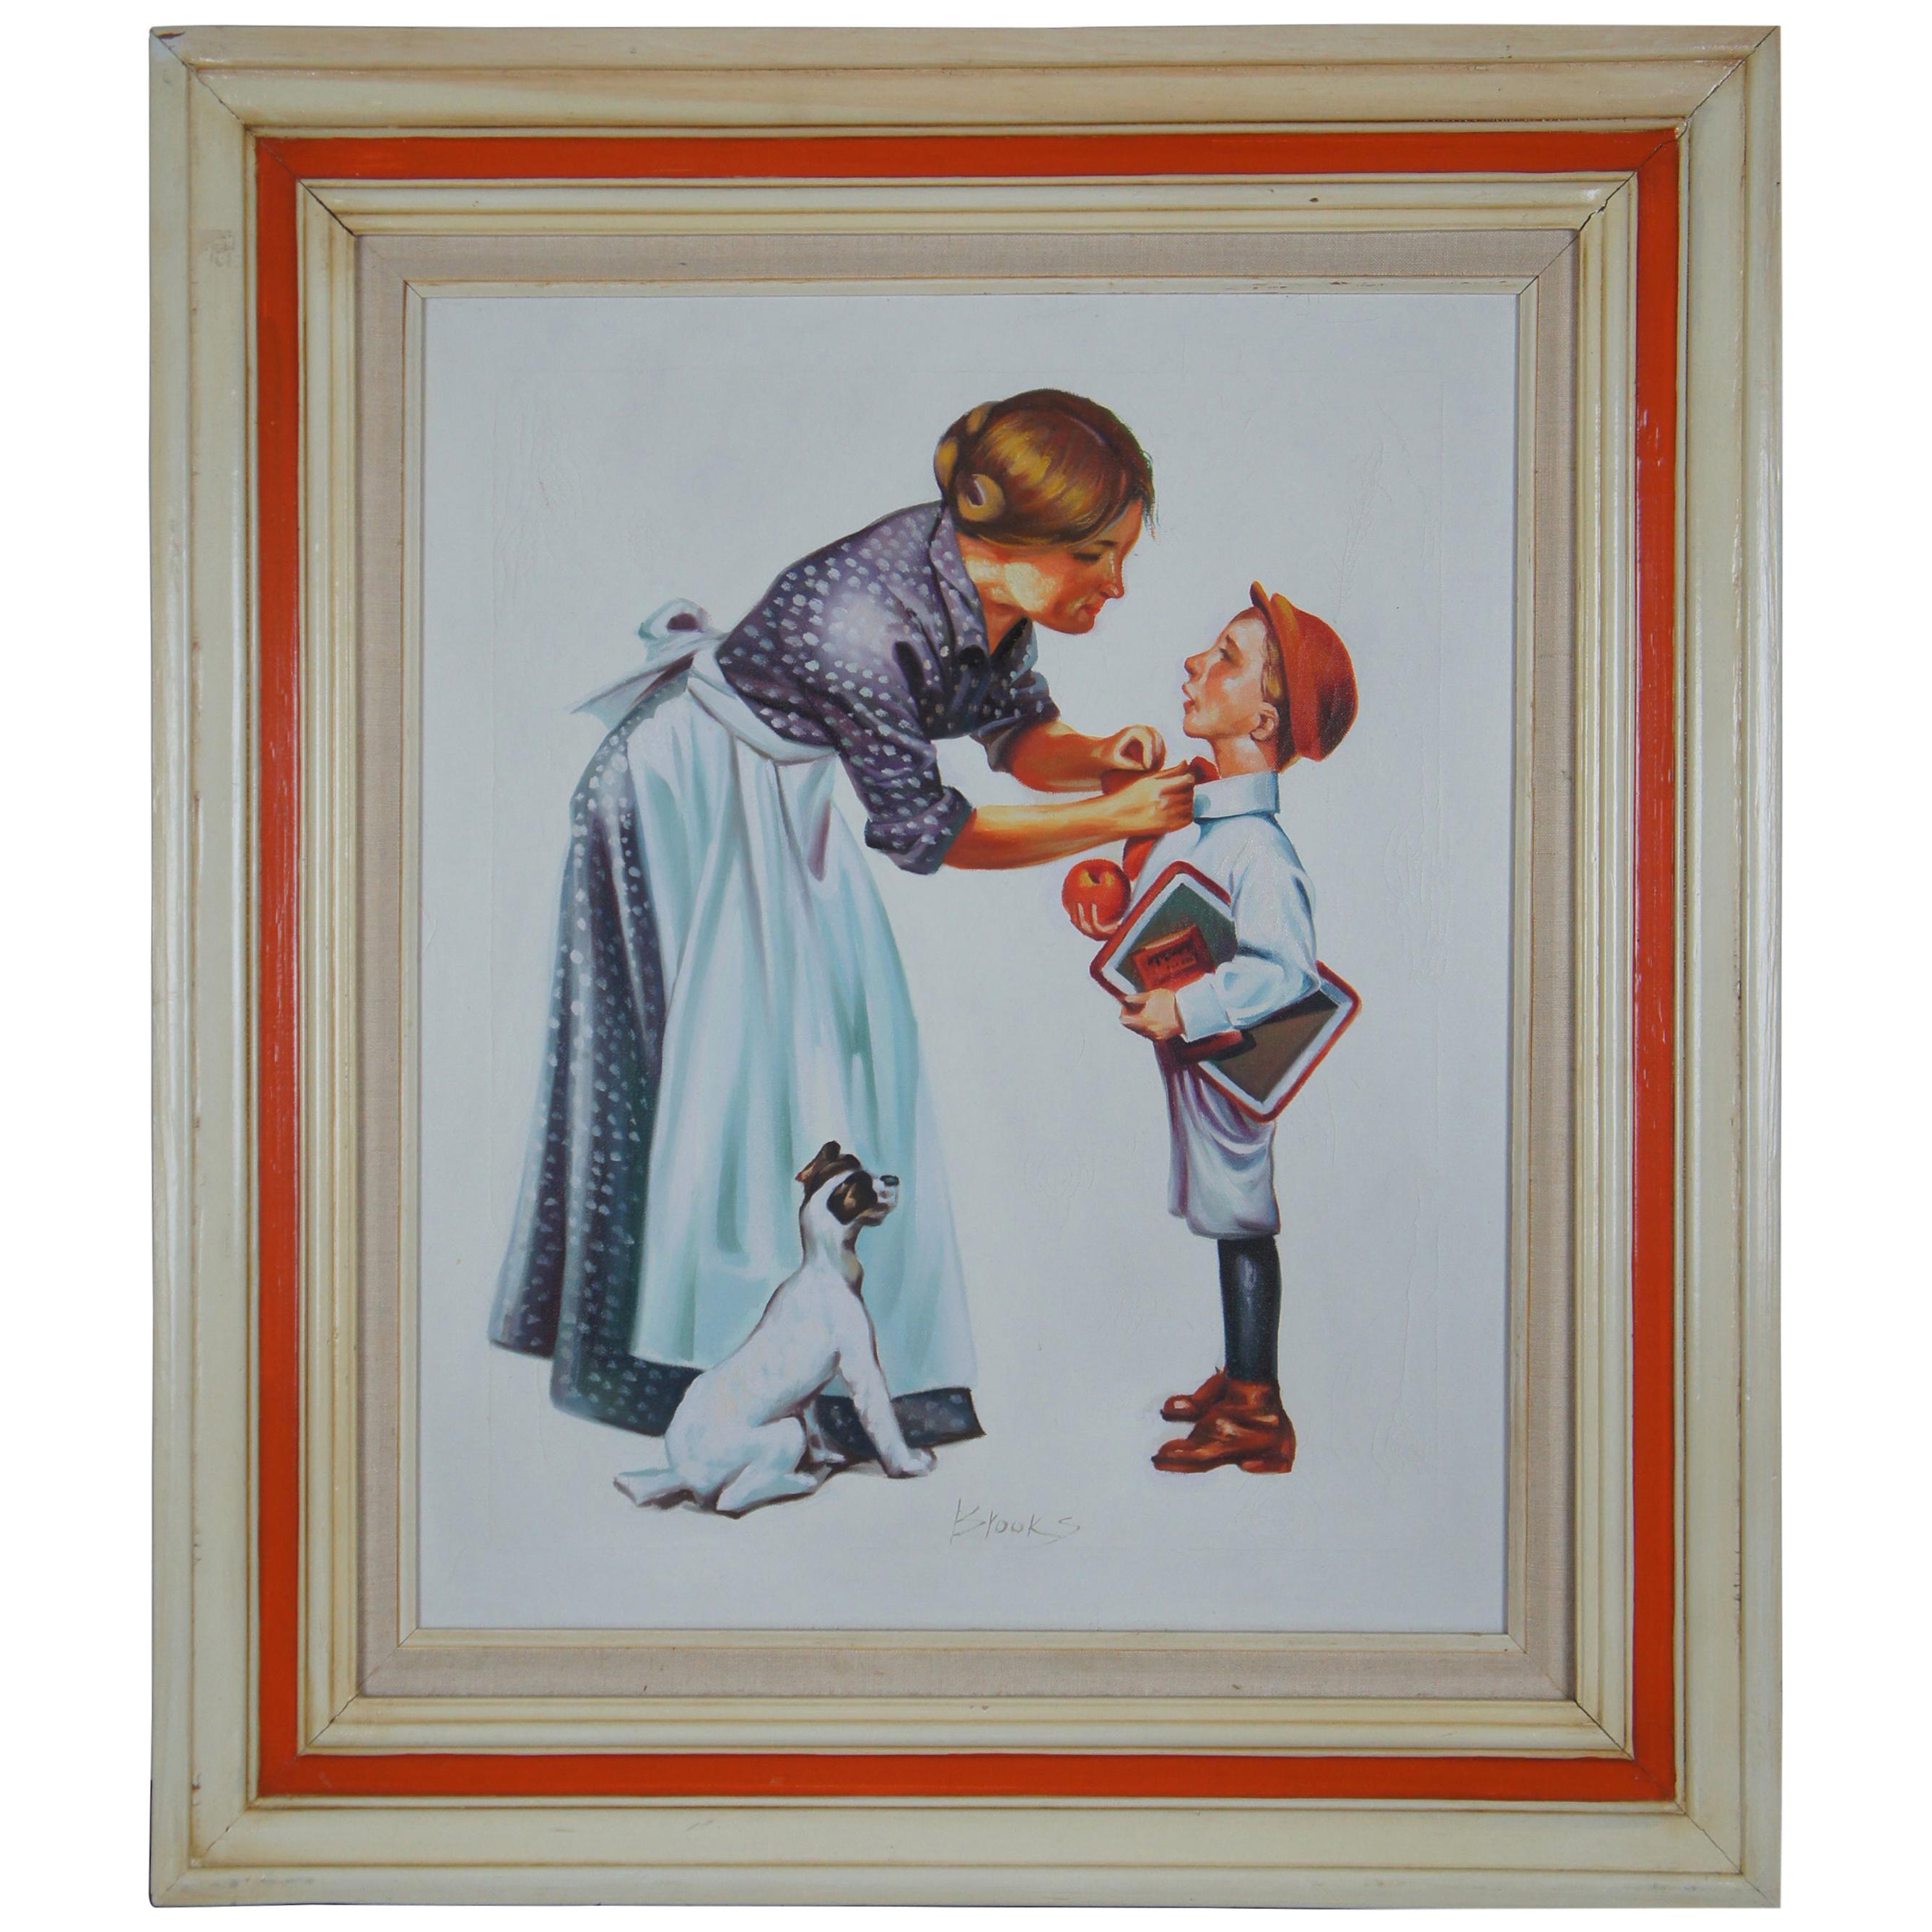 First Day of School Realist Illustration Oil Painting Canvas by Brooks, 1950s